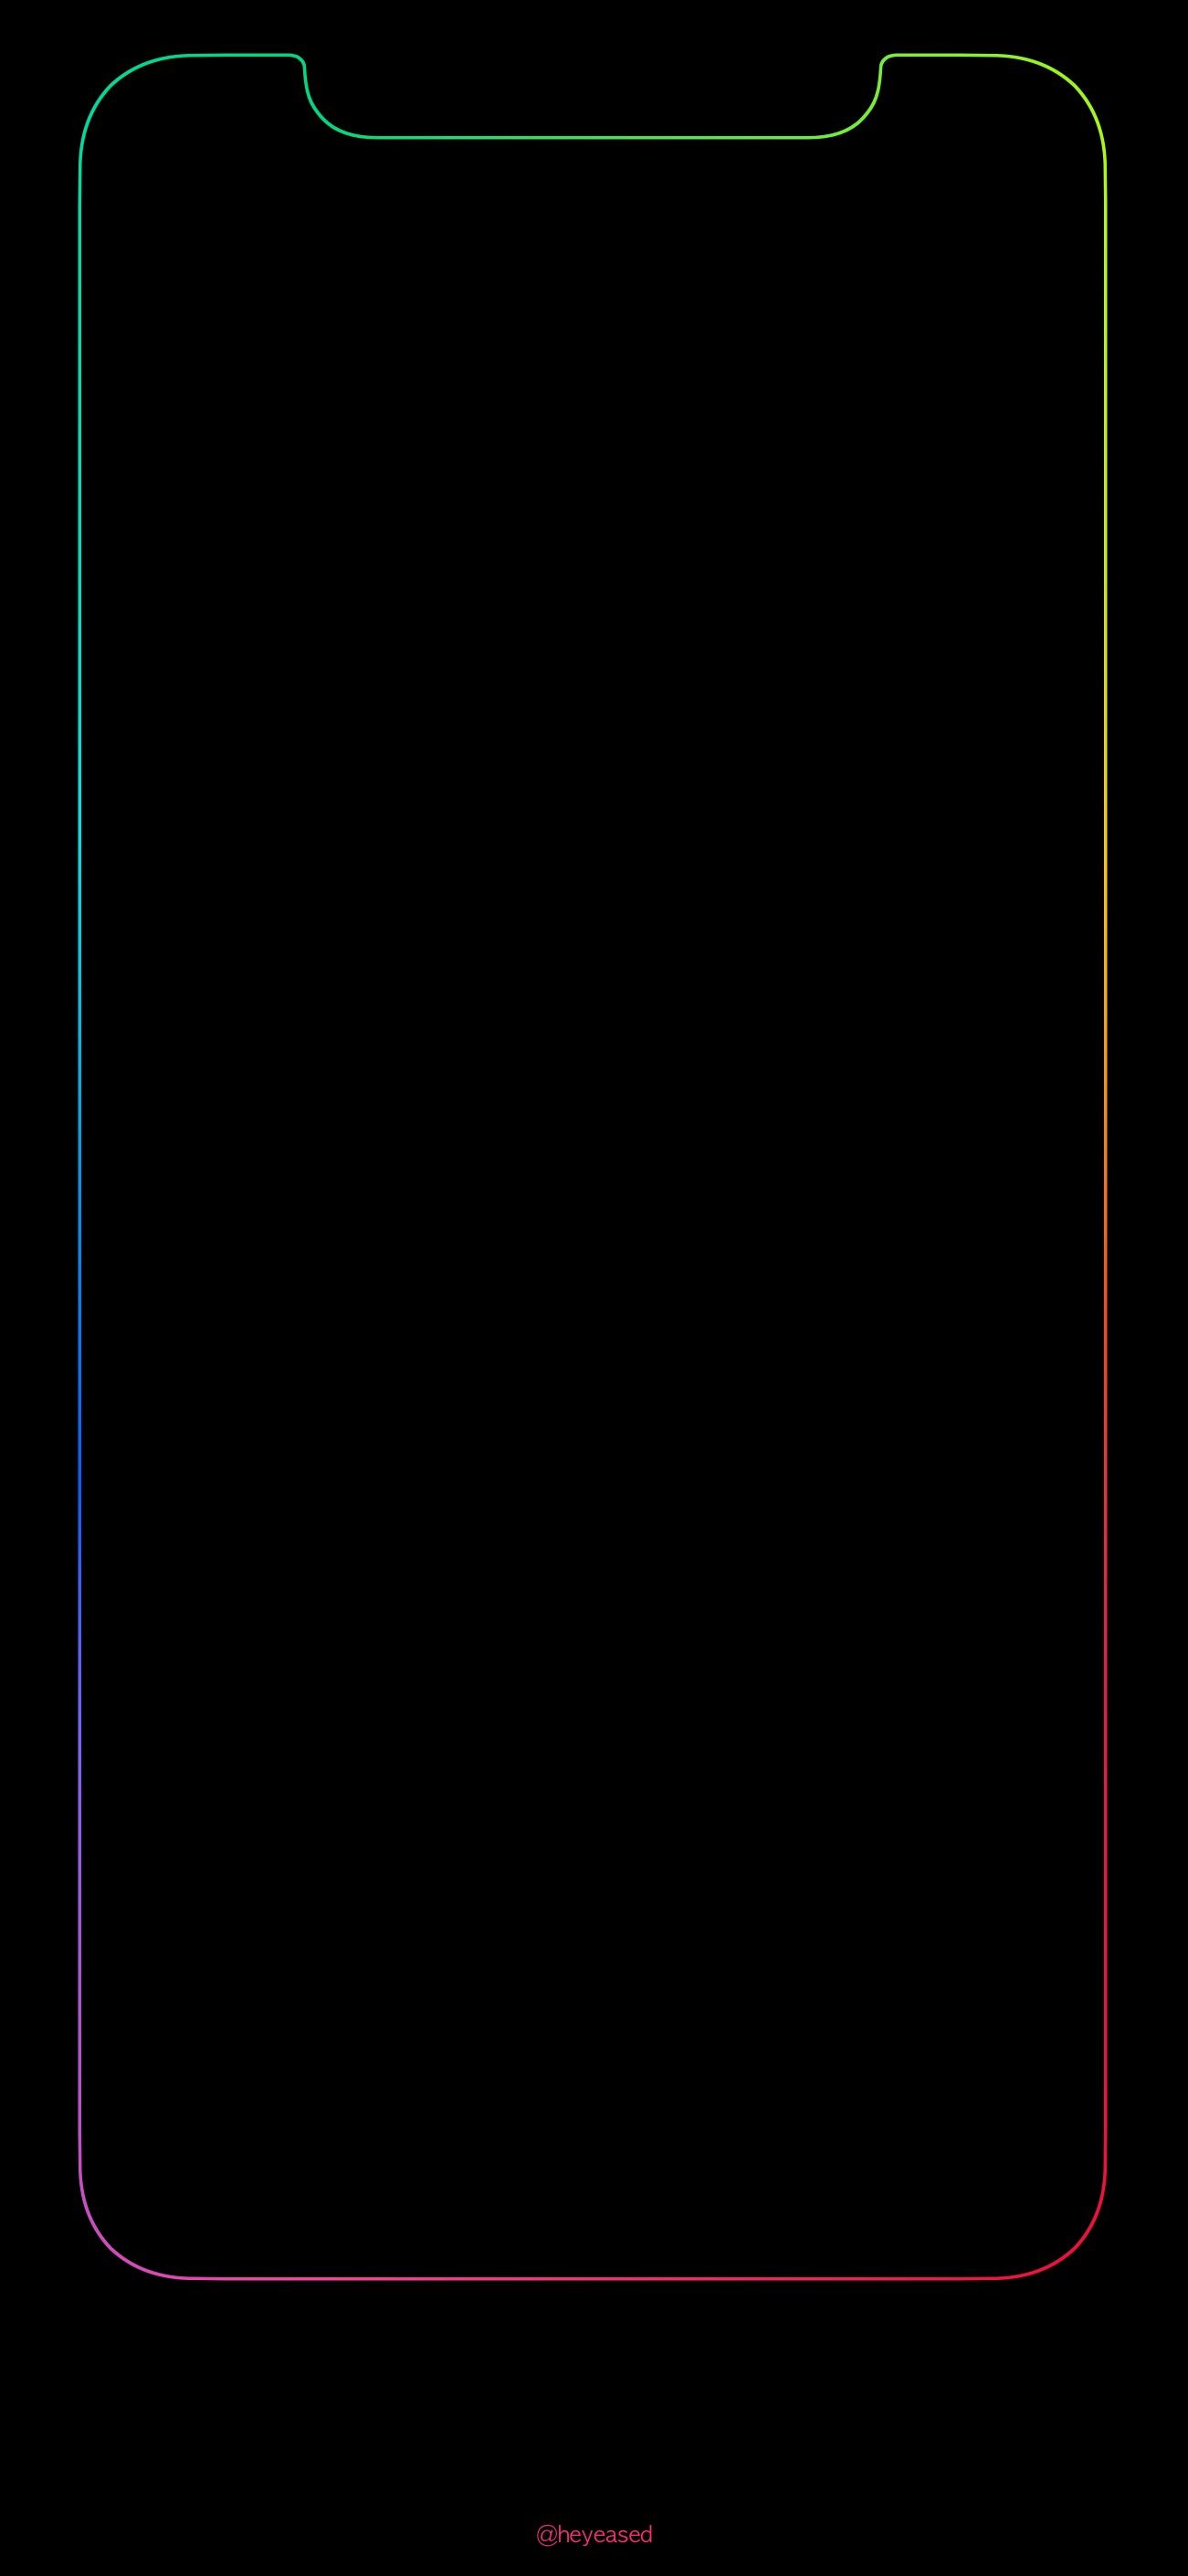 All black wallpapers